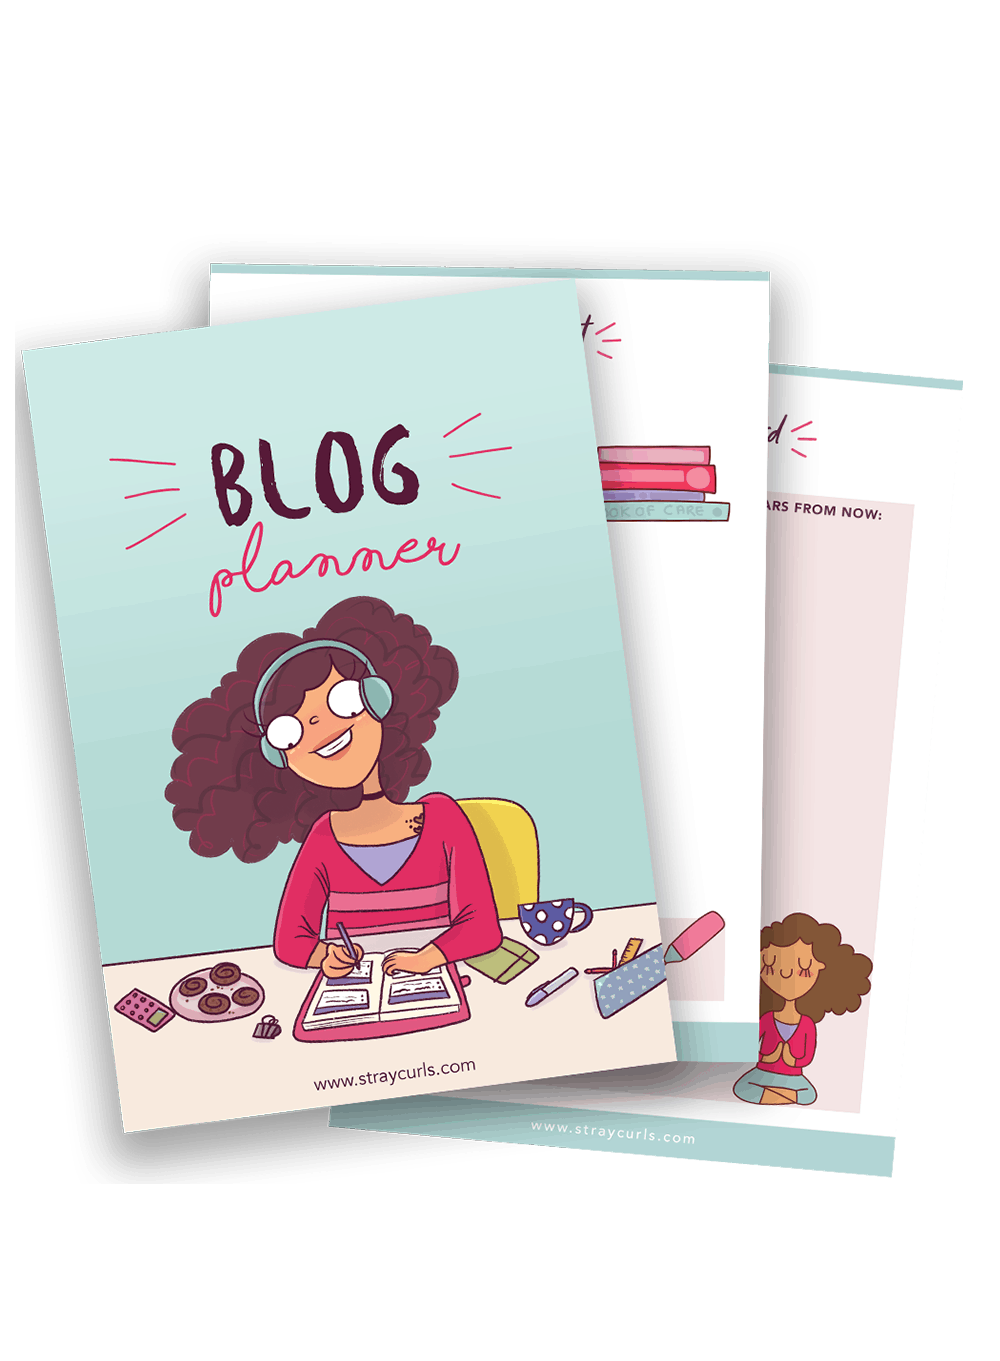 This free printable blog planner is not only super cute with little girl and cat stickers but is also super functional! Stay super organised and keep track of all your blogging goals by downloading this 12 page blog planner! #blogplanner #plannerlife #planner #girlboss #free #freeprintable #blogging